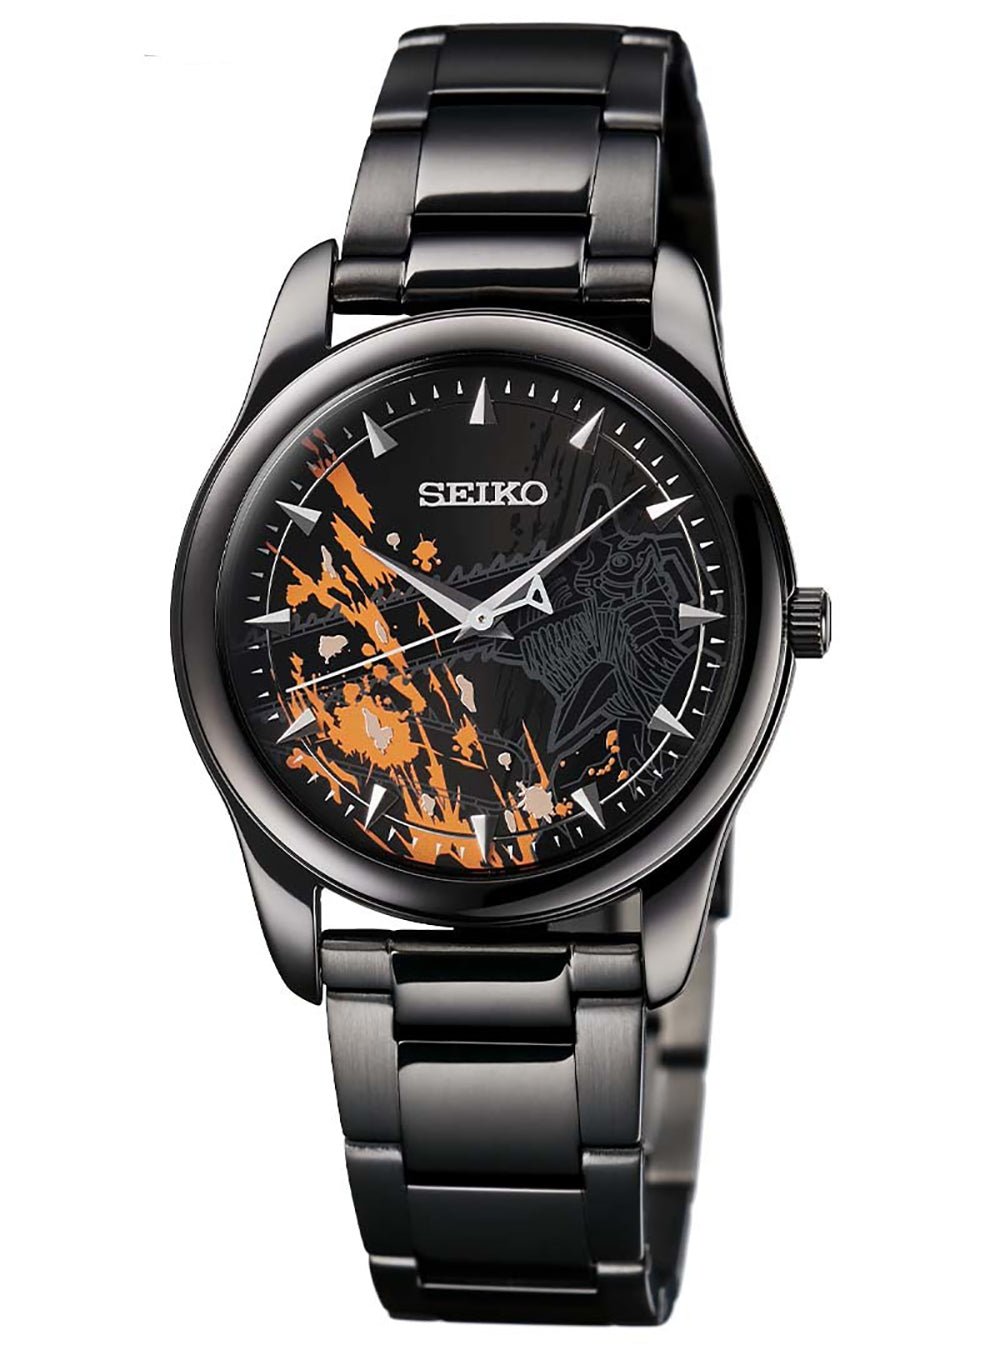 CHAINSAW MAN × SEIKO COLLABORATION WATCH LIMITED EDITION MADE IN JAPAN